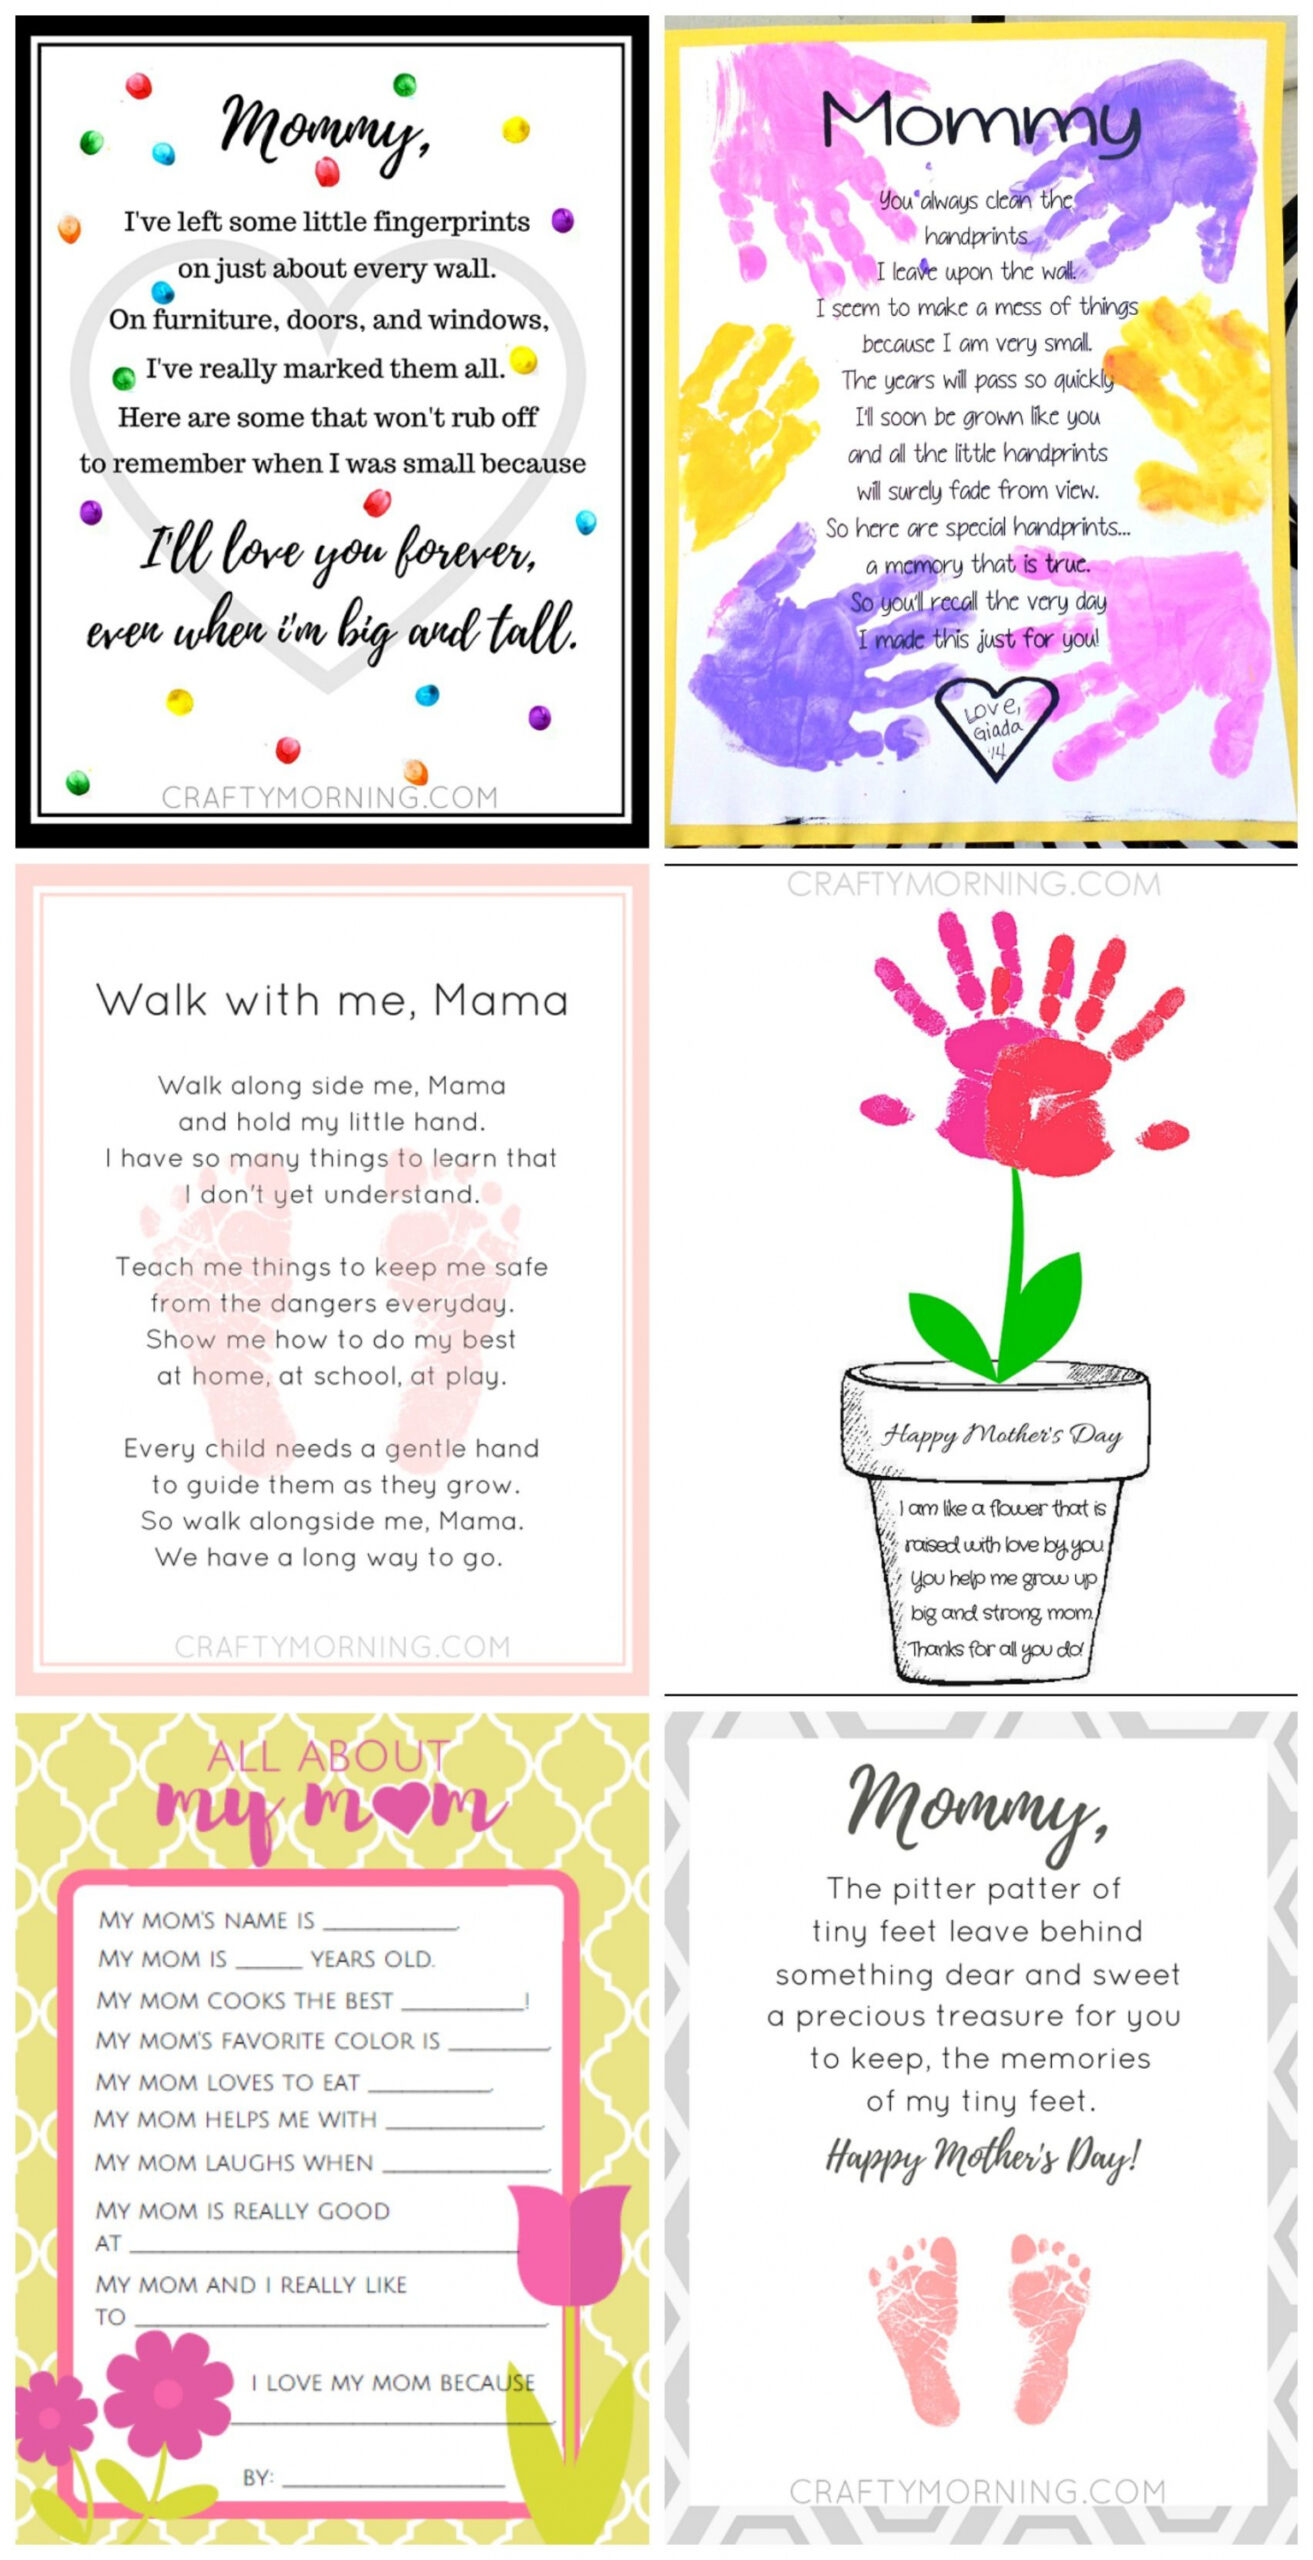 Pin on Crafty Morning Blog ❤ - FREE Printables - Free Printable Mothers Day Poems